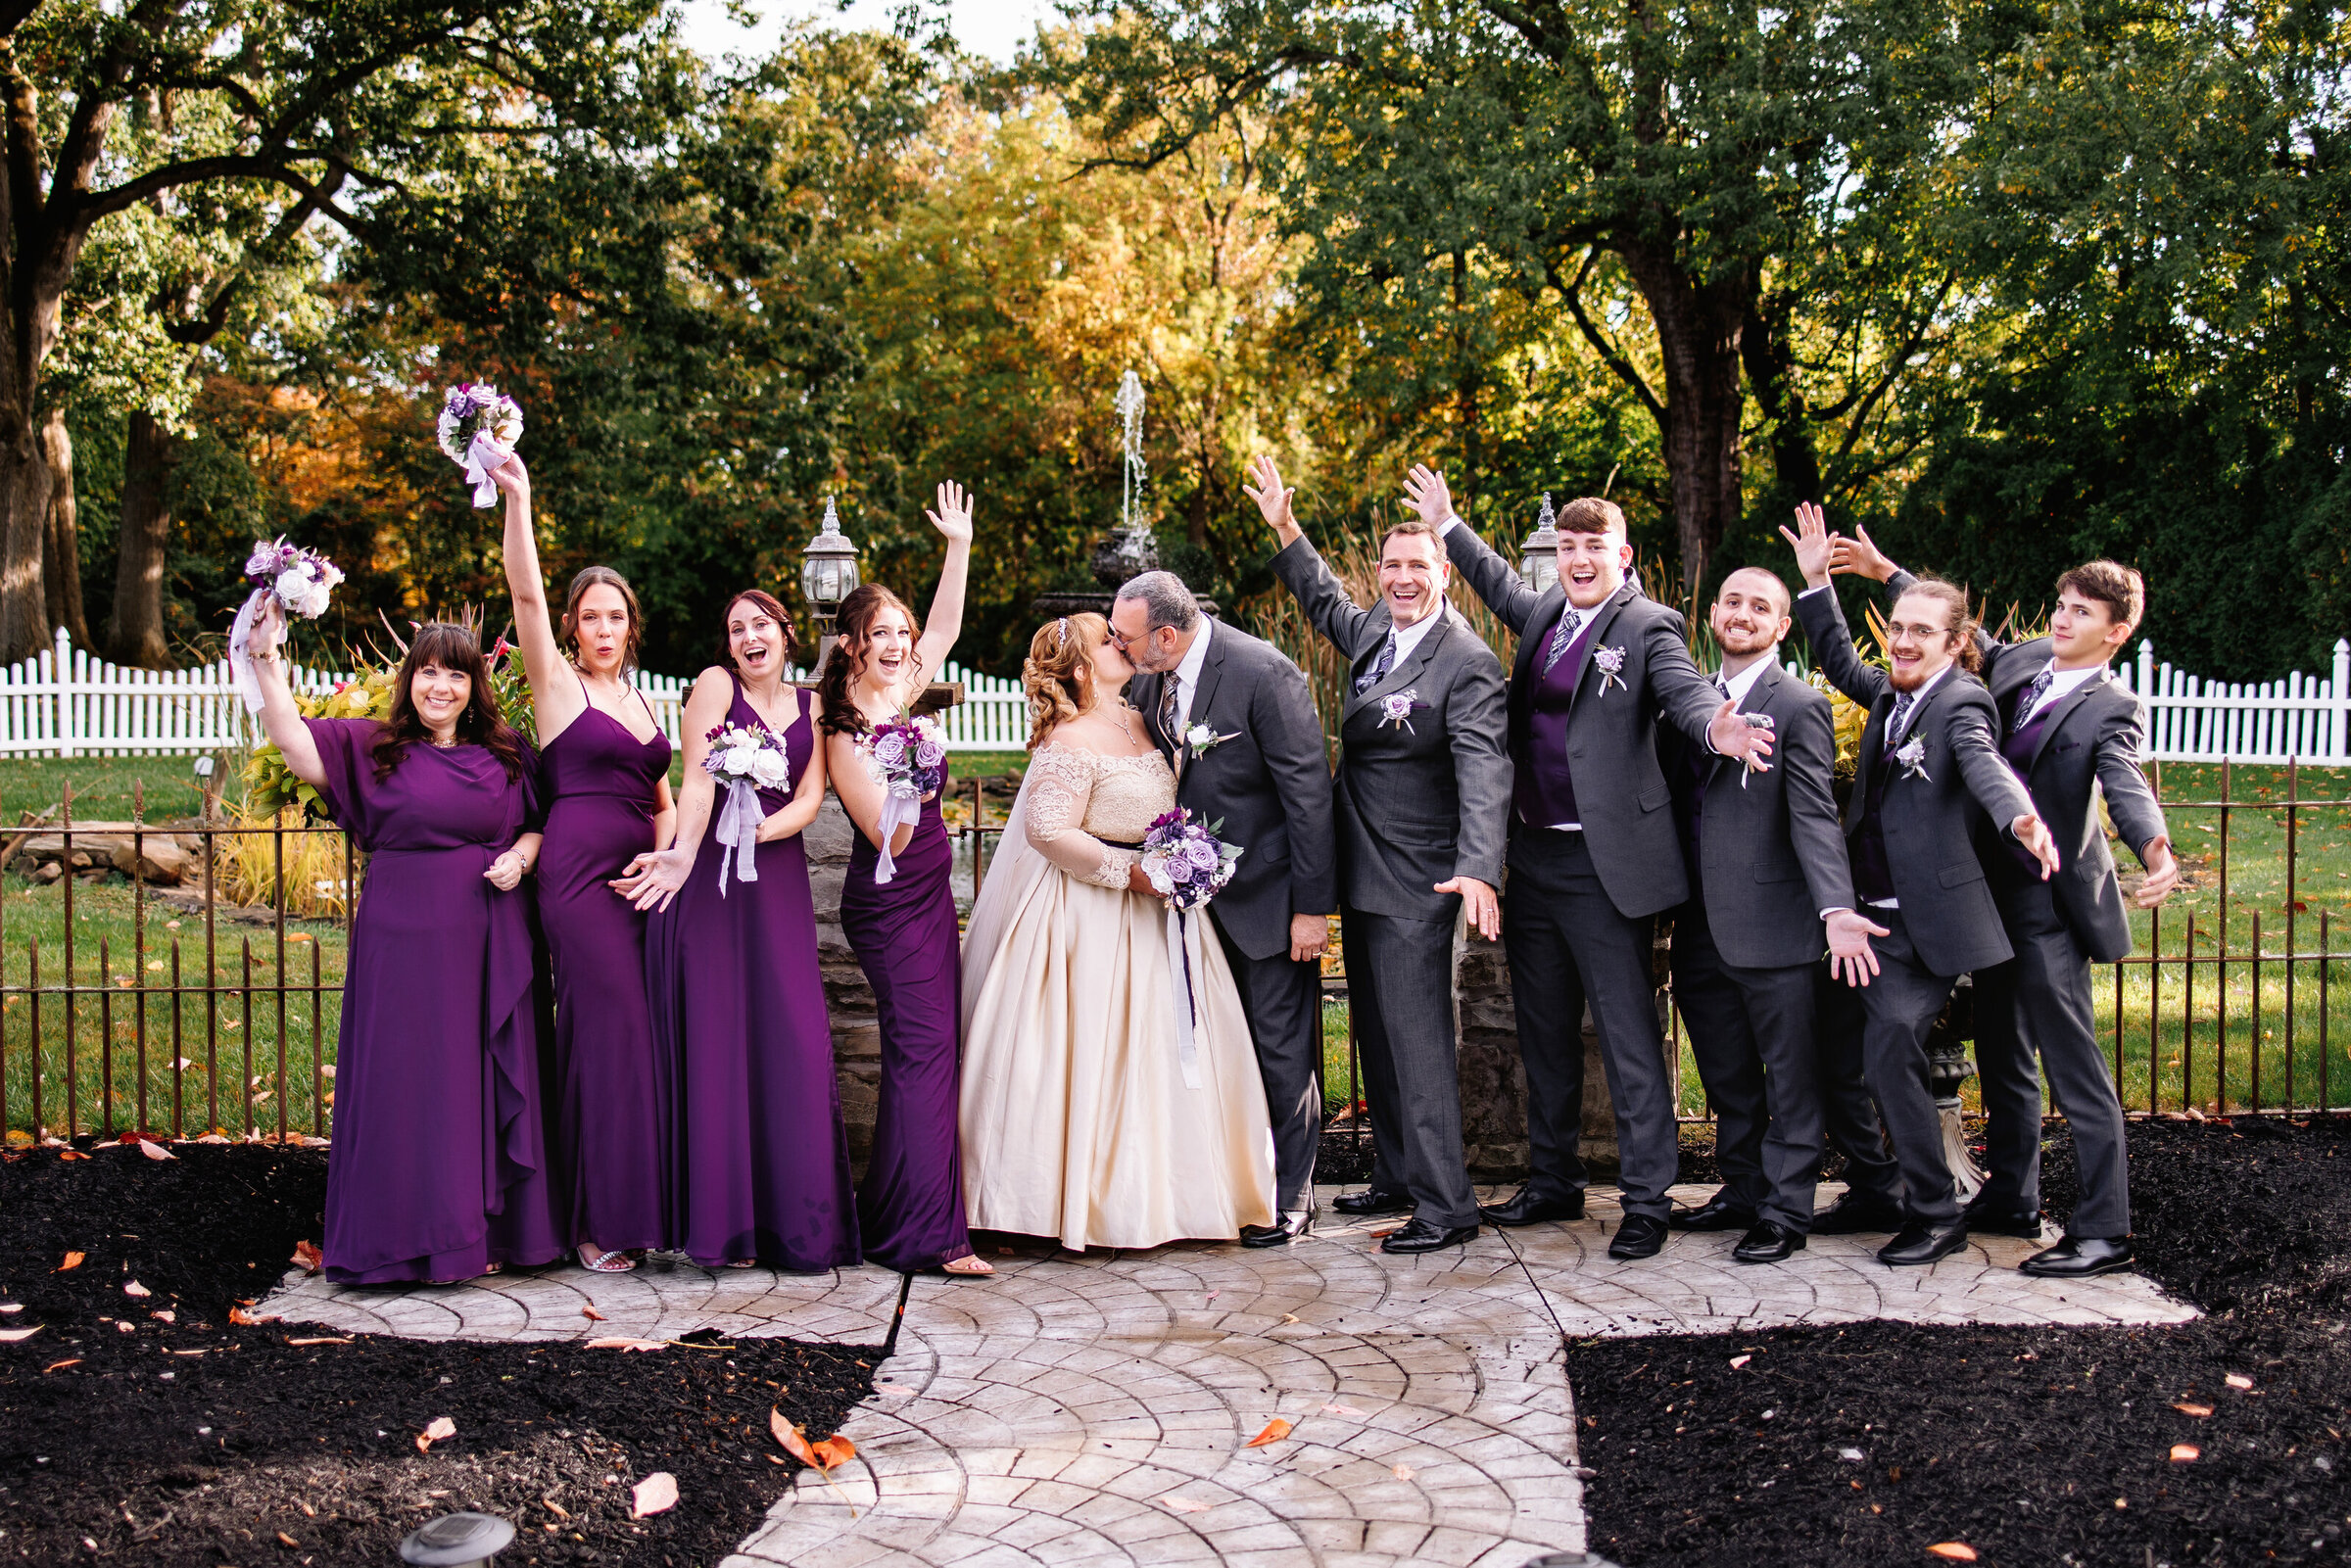 Bridal party cheers enthusiastically while bride and groom share a kiss